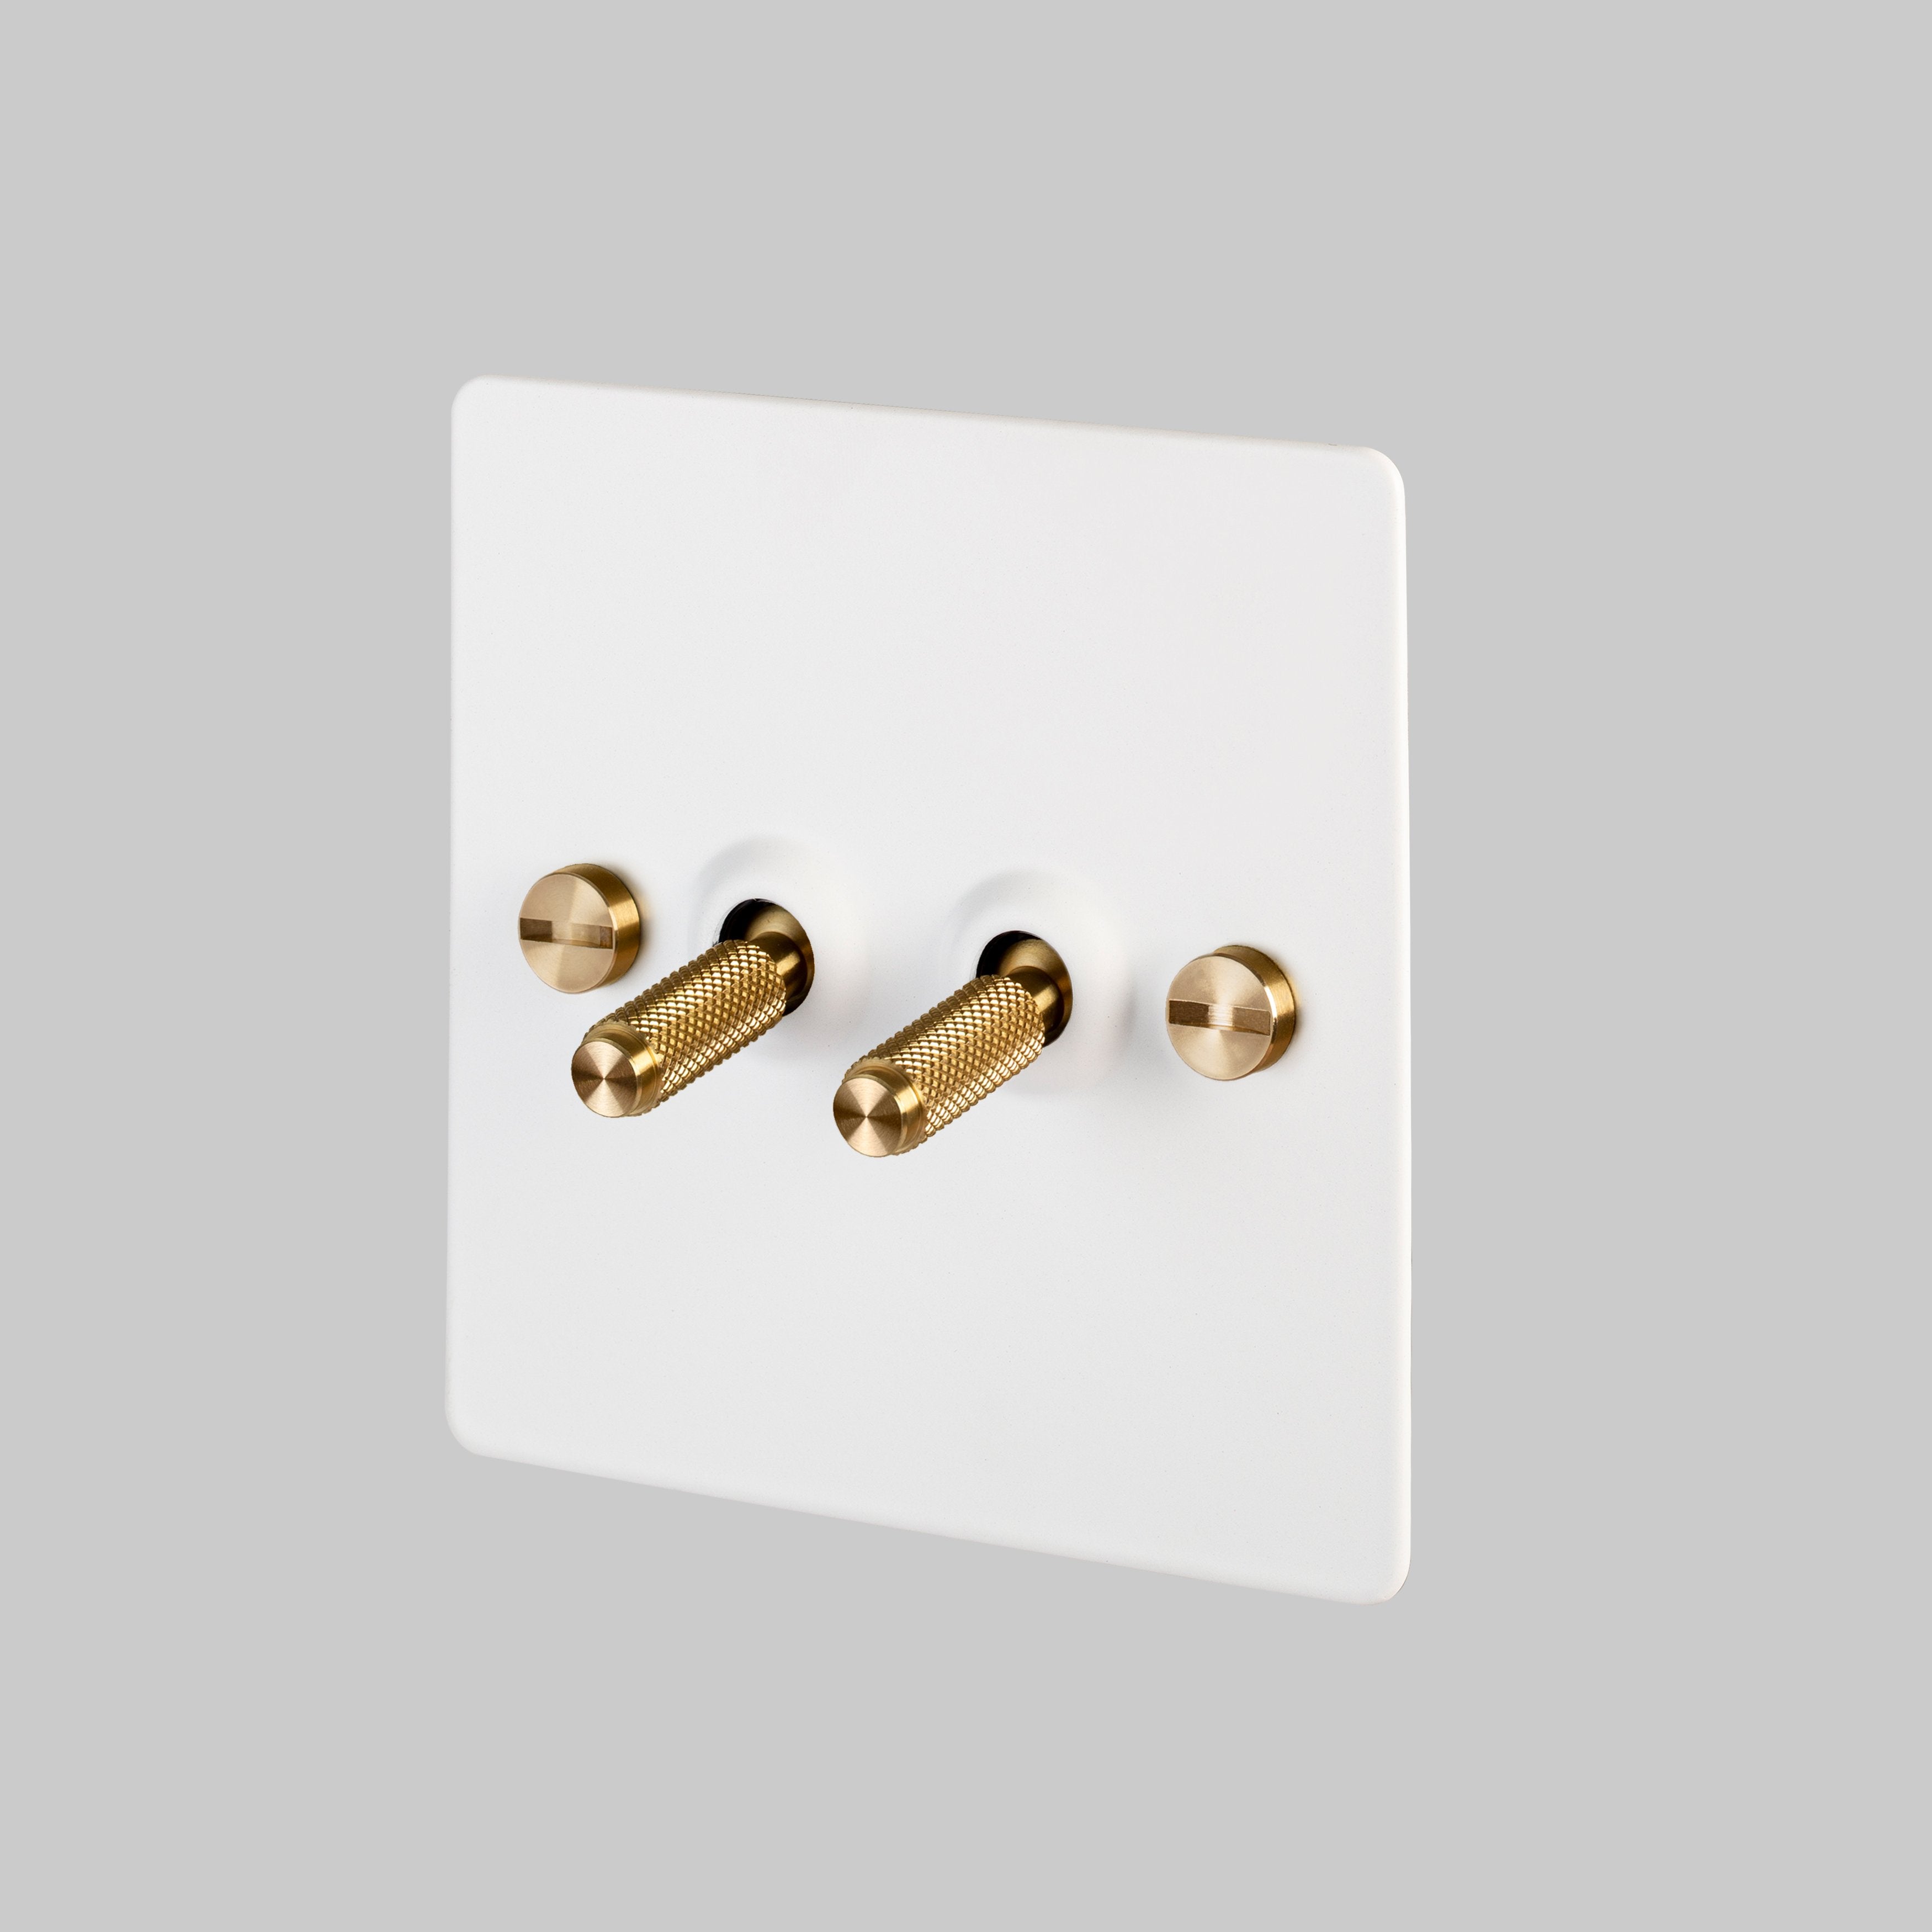 Buster and Punch 2G TOGGLE SWITCH / WHITE / BRASS